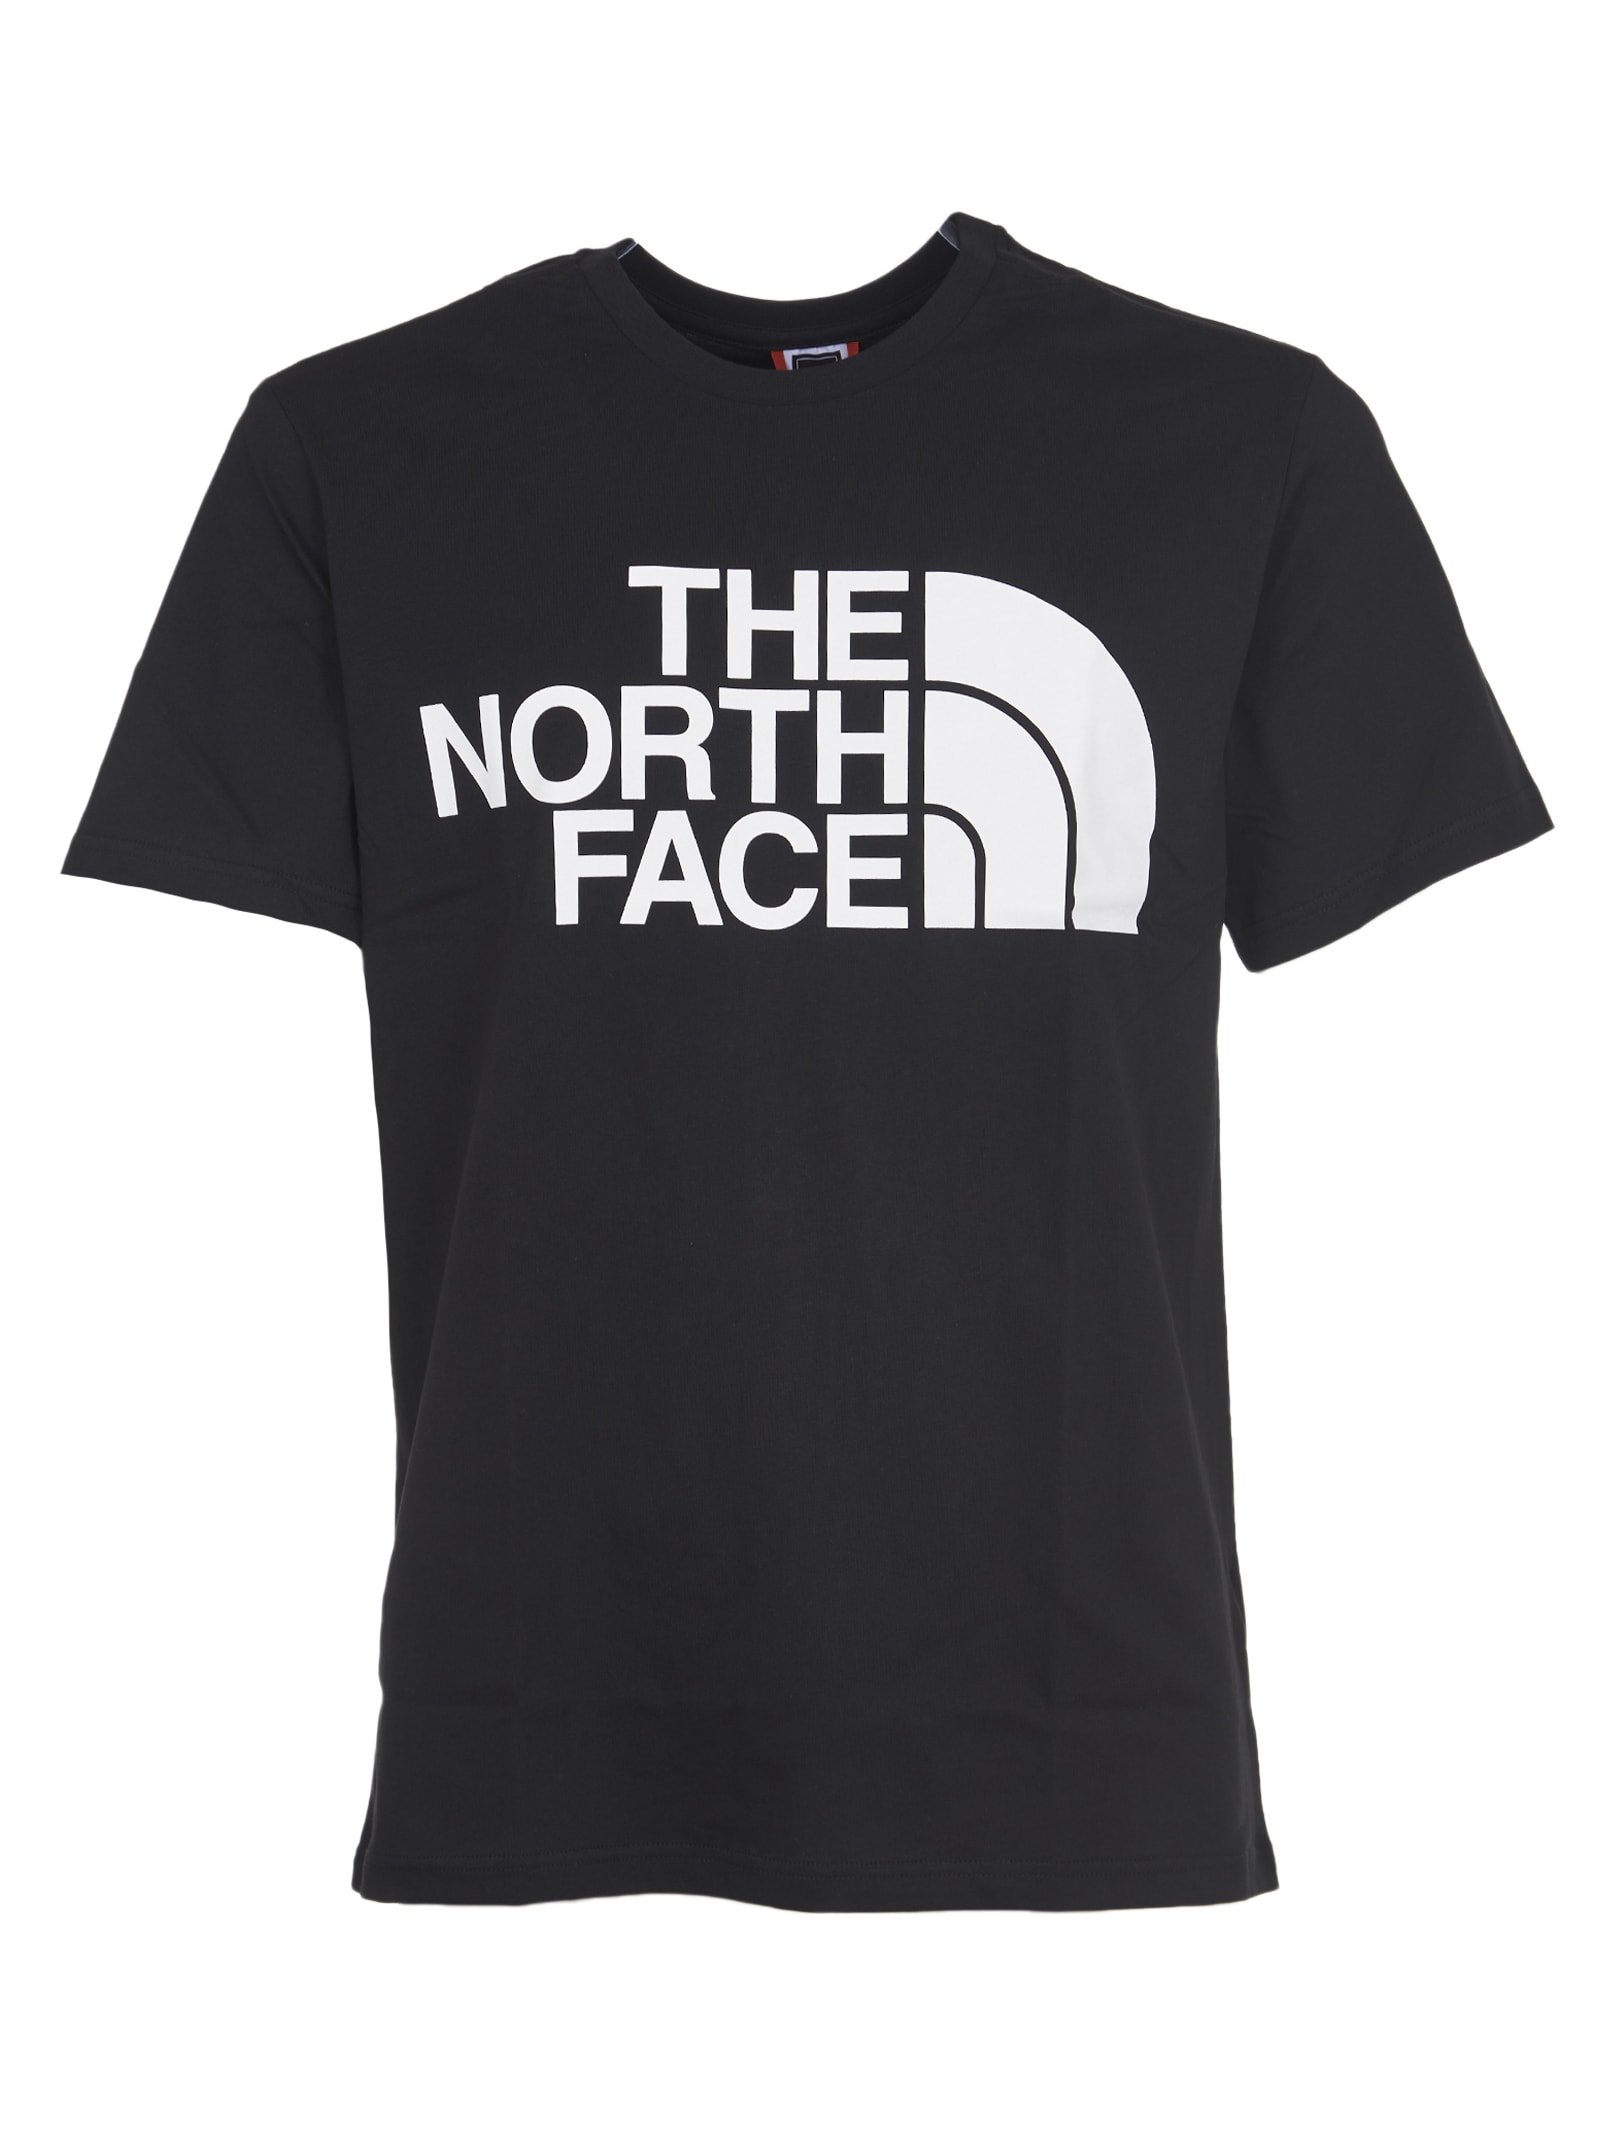 The North Face Black T-shirt With Logo